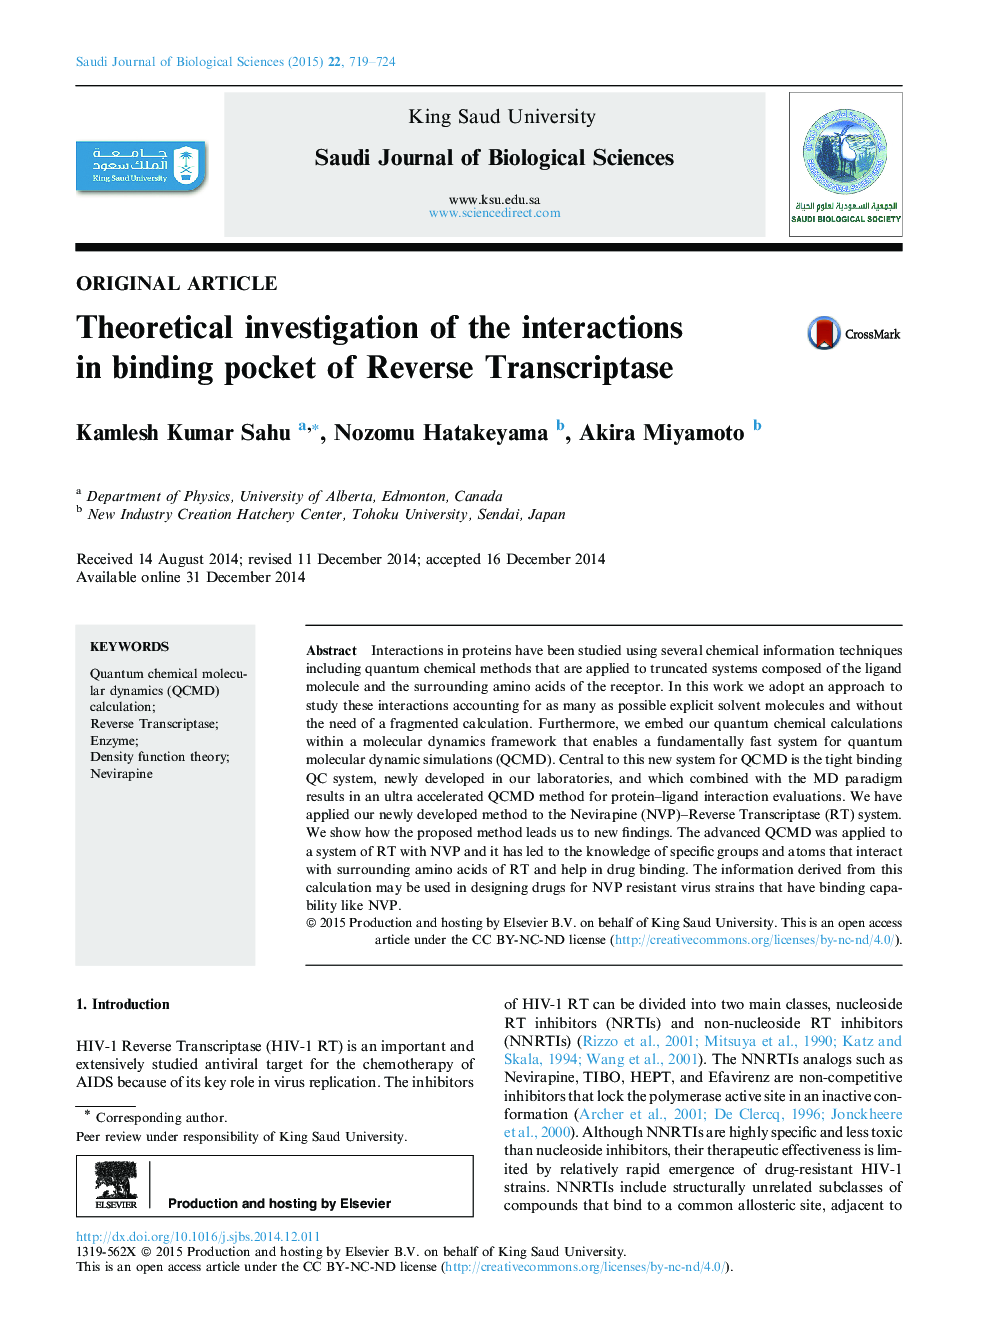 Theoretical investigation of the interactions in binding pocket of Reverse Transcriptase 